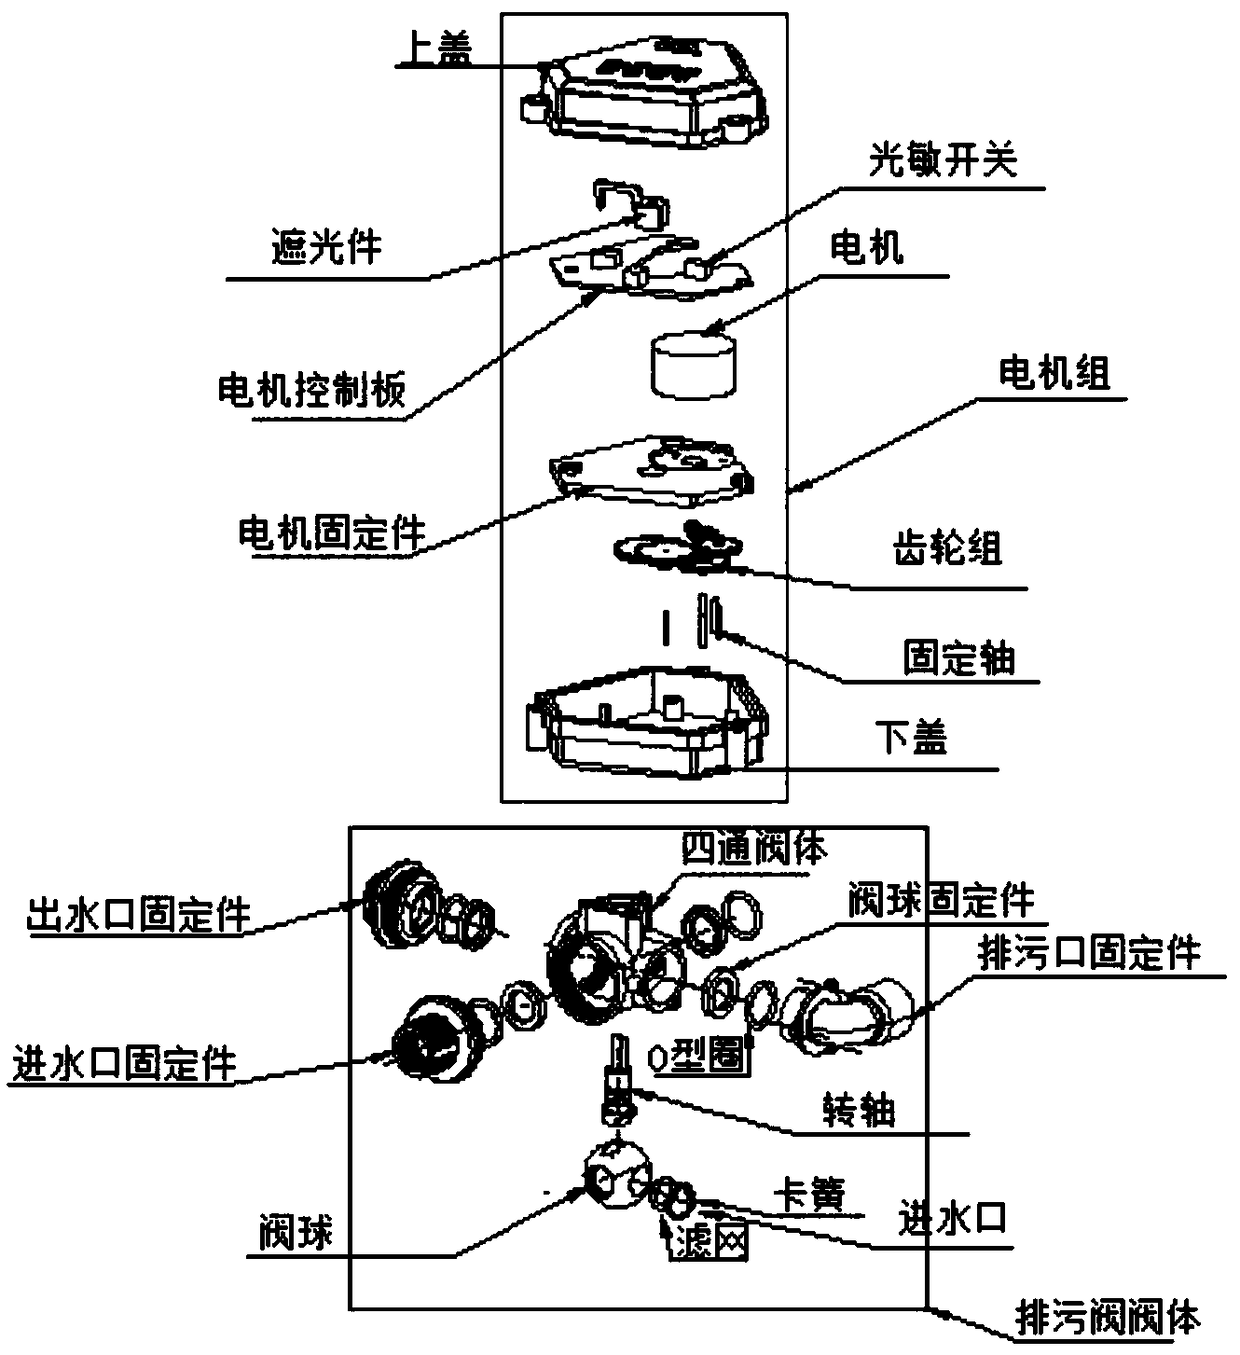 Automatic pollution discharge valve and micro-water power generation automatic pollution discharge system